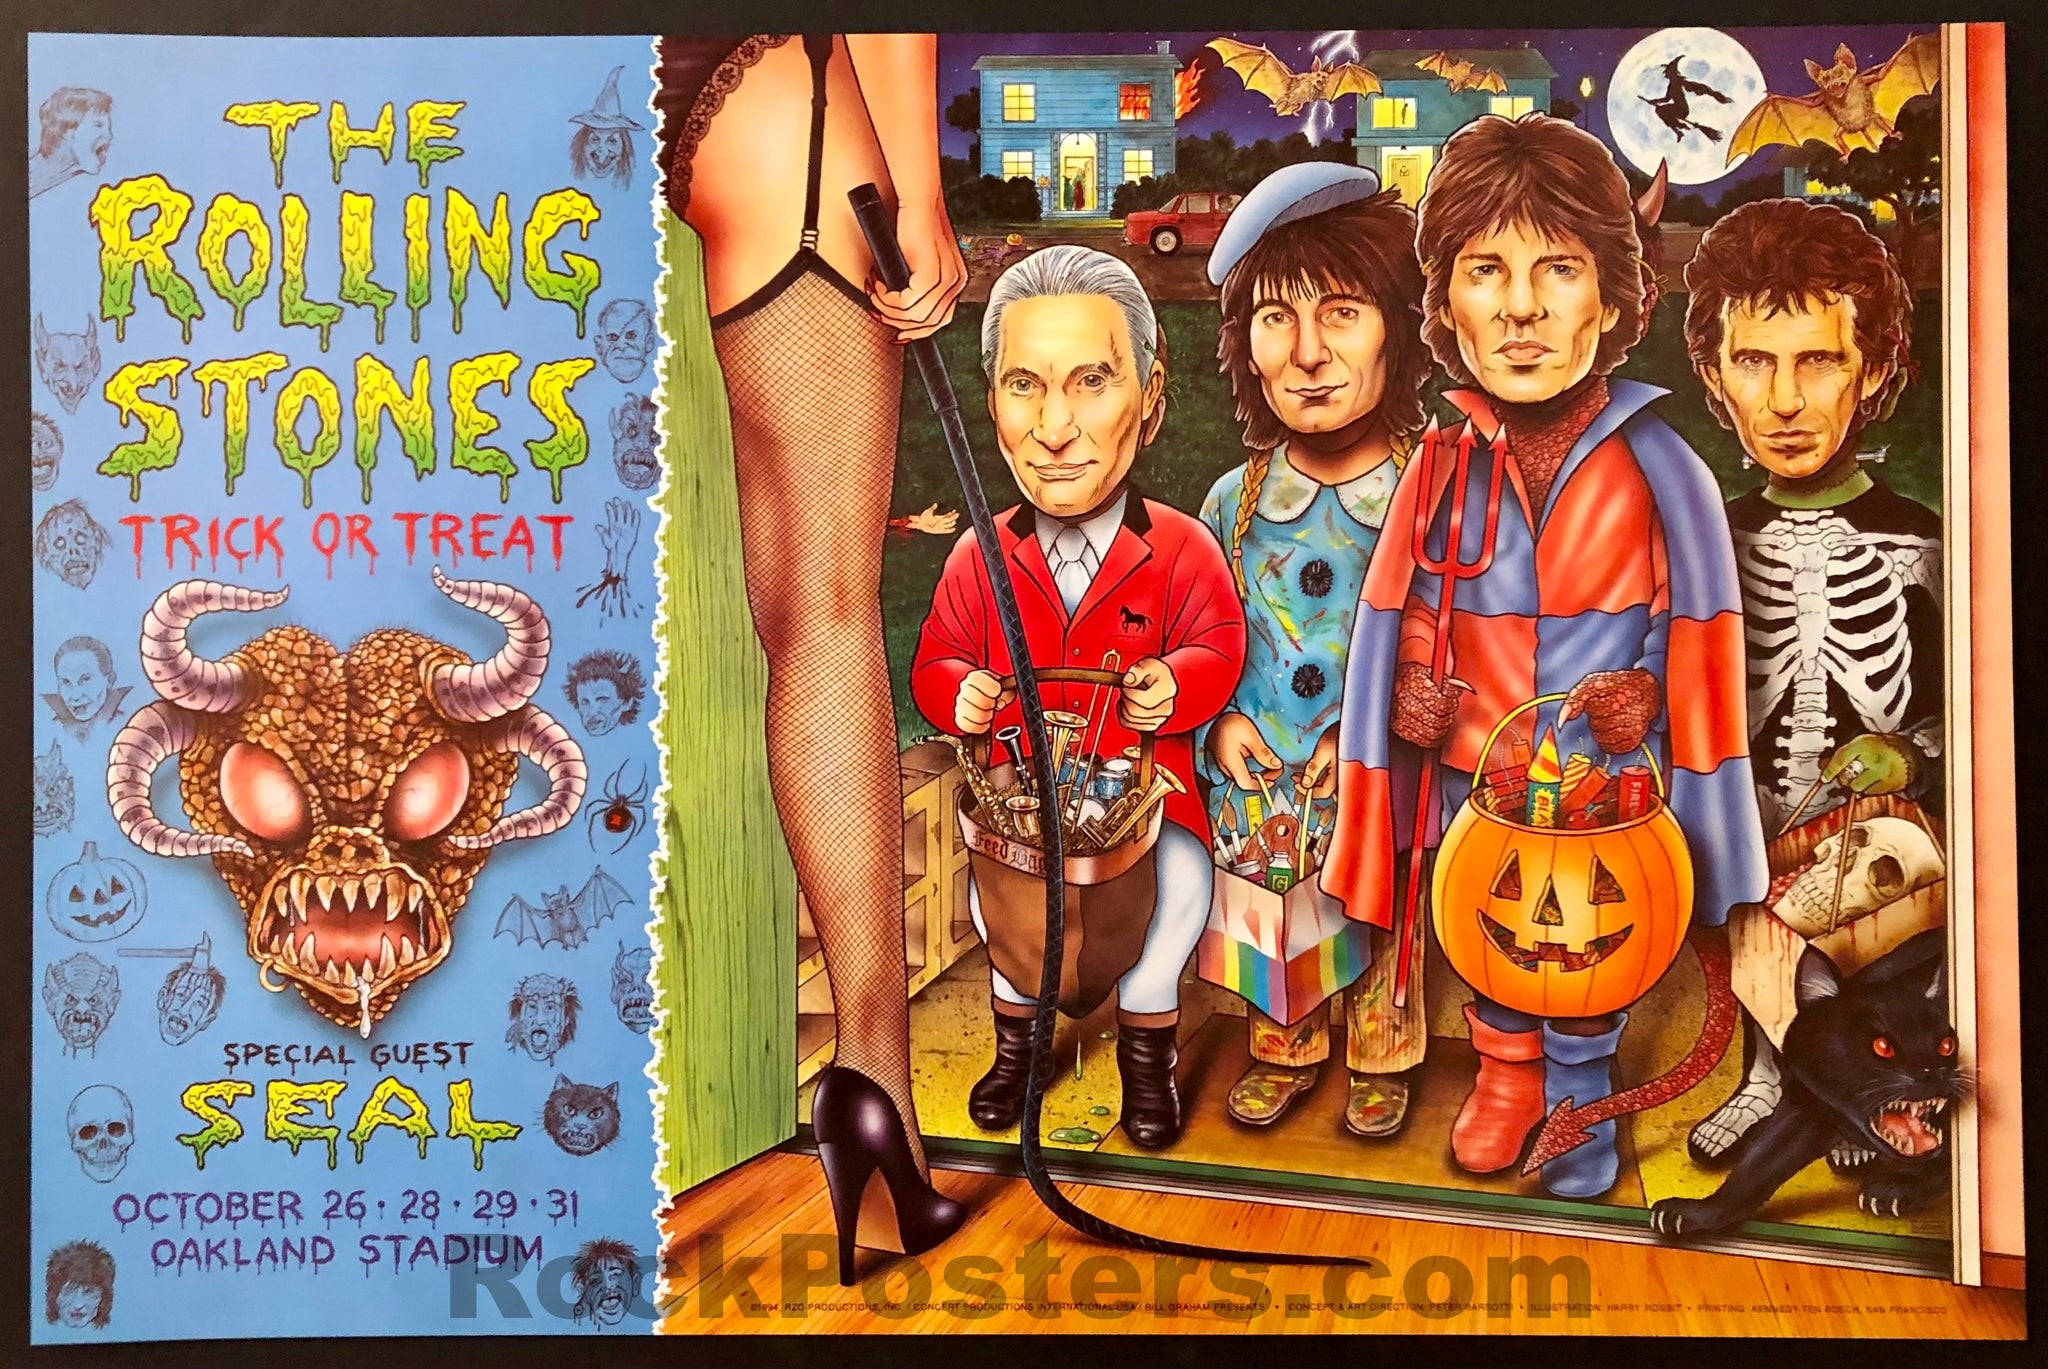 AUCTION - BGP-100 - Rolling Stones - Oakland 1994 - Harry Rossit - 1st Edition Poster - Near Mint